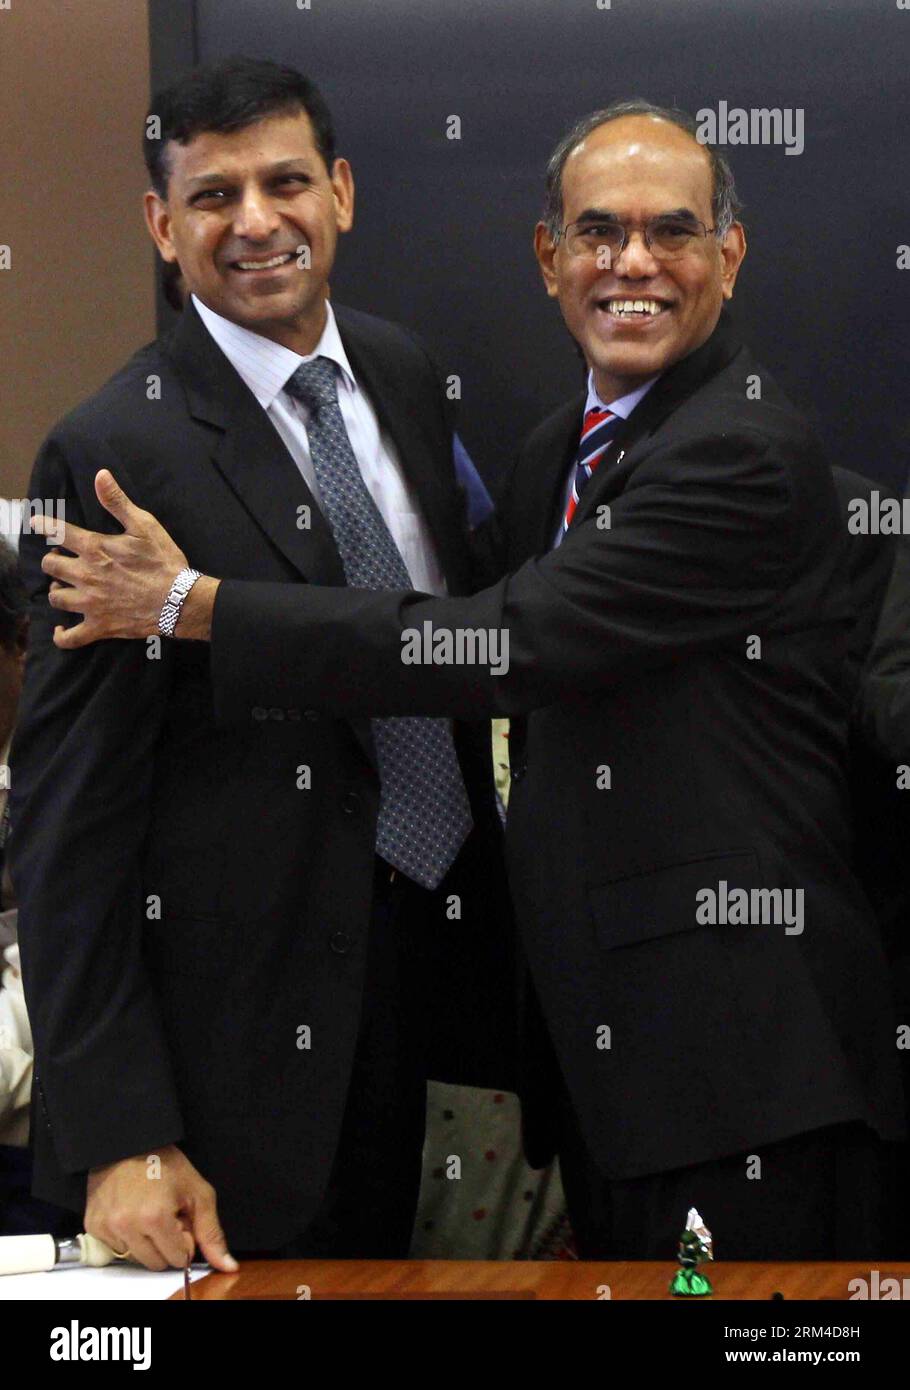 Bildnummer: 60436372  Datum: 04.09.2013  Copyright: imago/Xinhua MUMBAI, Sept. 4, 2013 (Xinhua) -- Newly appointed governor of the Reserve Bank of India Raghuram Rajan (L) is greeted by outgoing governor D Subbarao in Mumbai, India, Sept. 4, 2013. A former International Monetary Fund (IMF) chief economist Wednesday took over as the new governor of the country s central bank, the Reserve Bank of India (RBI). (Xinhua) (zcc) INDIA-MUMBAI-RBI-NEW GOVERNOR PUBLICATIONxNOTxINxCHN People Wirtschaft xns x0x 2013 hoch premiumd     60436372 Date 04 09 2013 Copyright Imago XINHUA Mumbai Sept 4 2013 XINHU Stock Photo